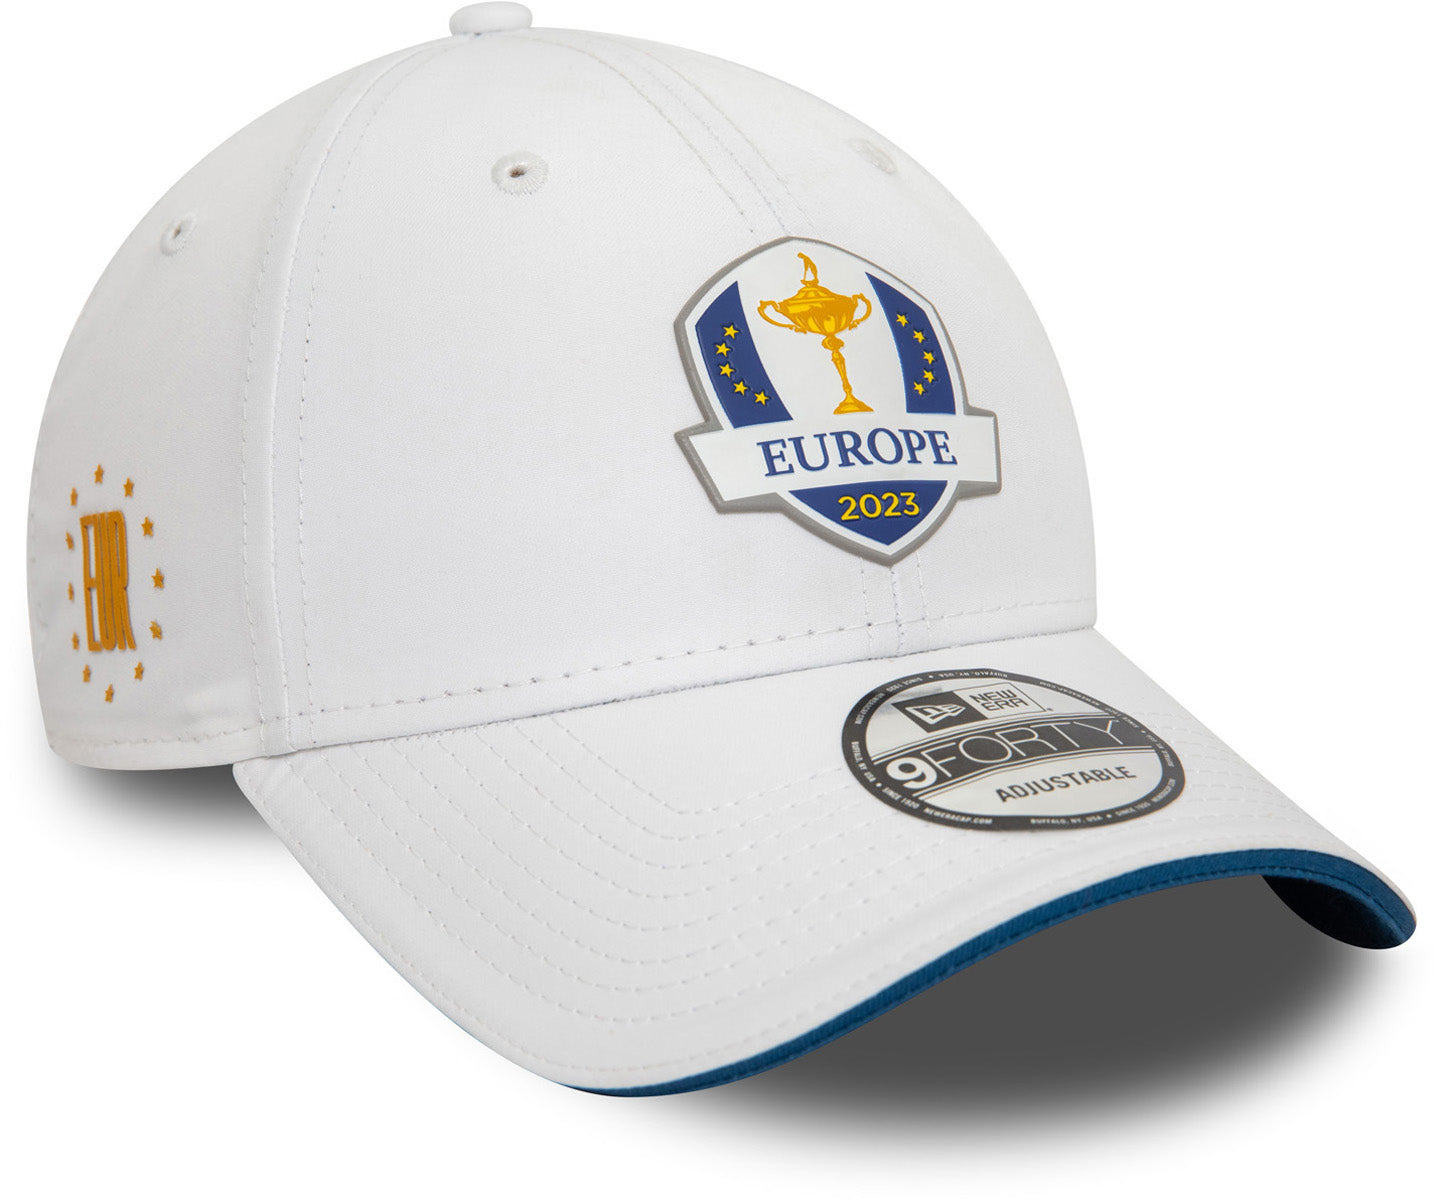 Inwoner stijl monster Ryder Cup 2023 New Era 9Forty Rep Sunday White Cap – lovemycap